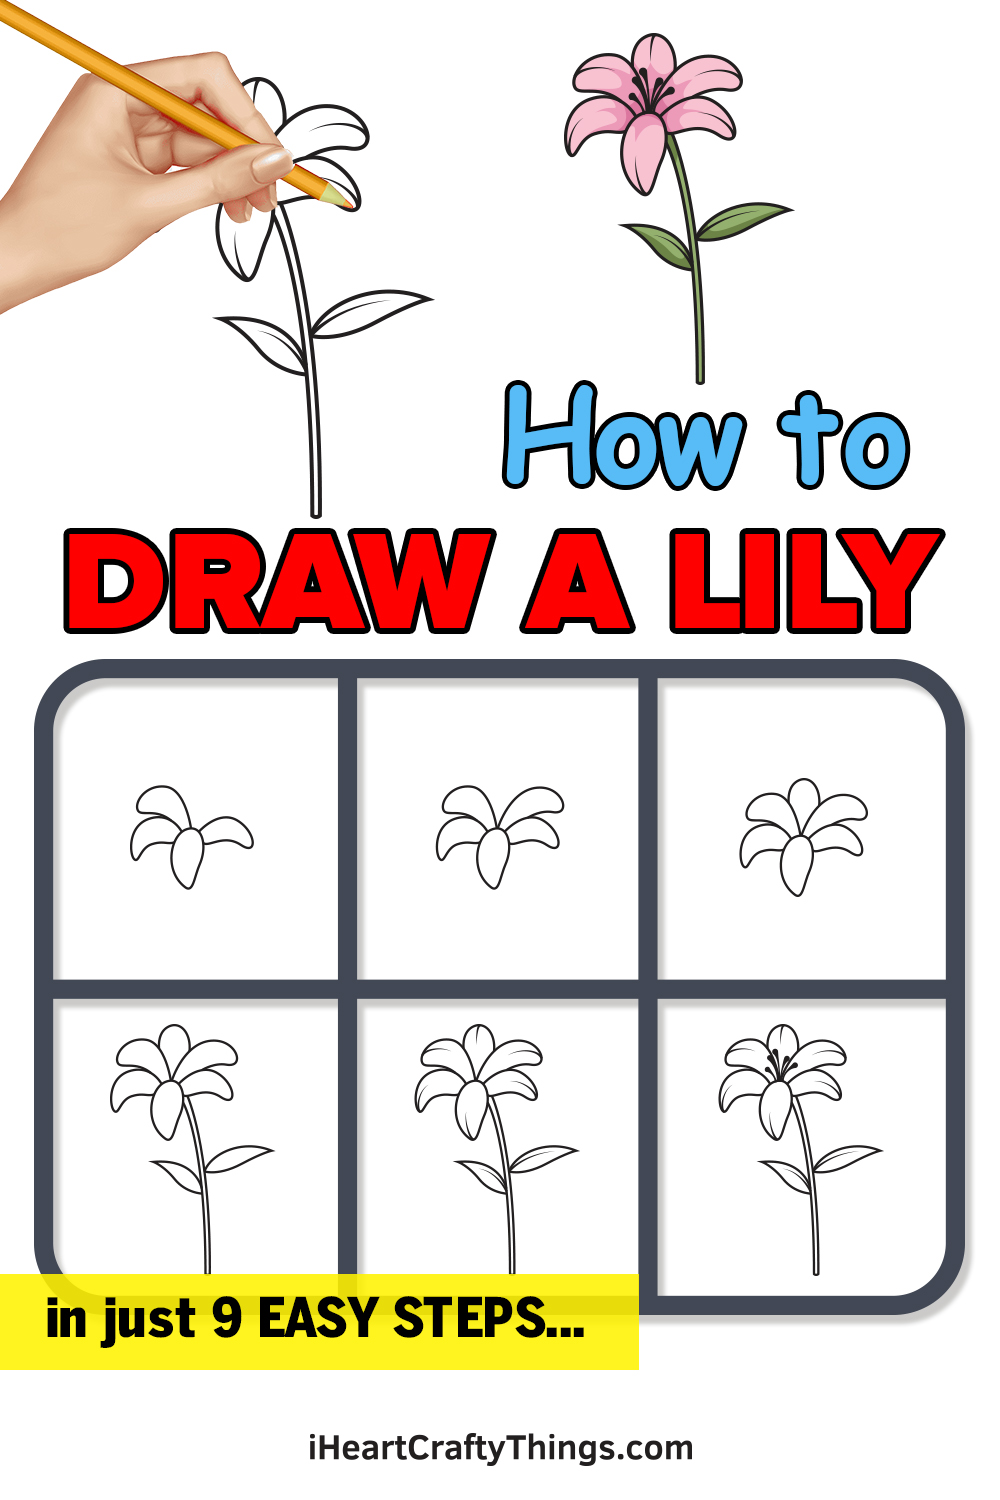 how to draw a lily in 9 easy steps